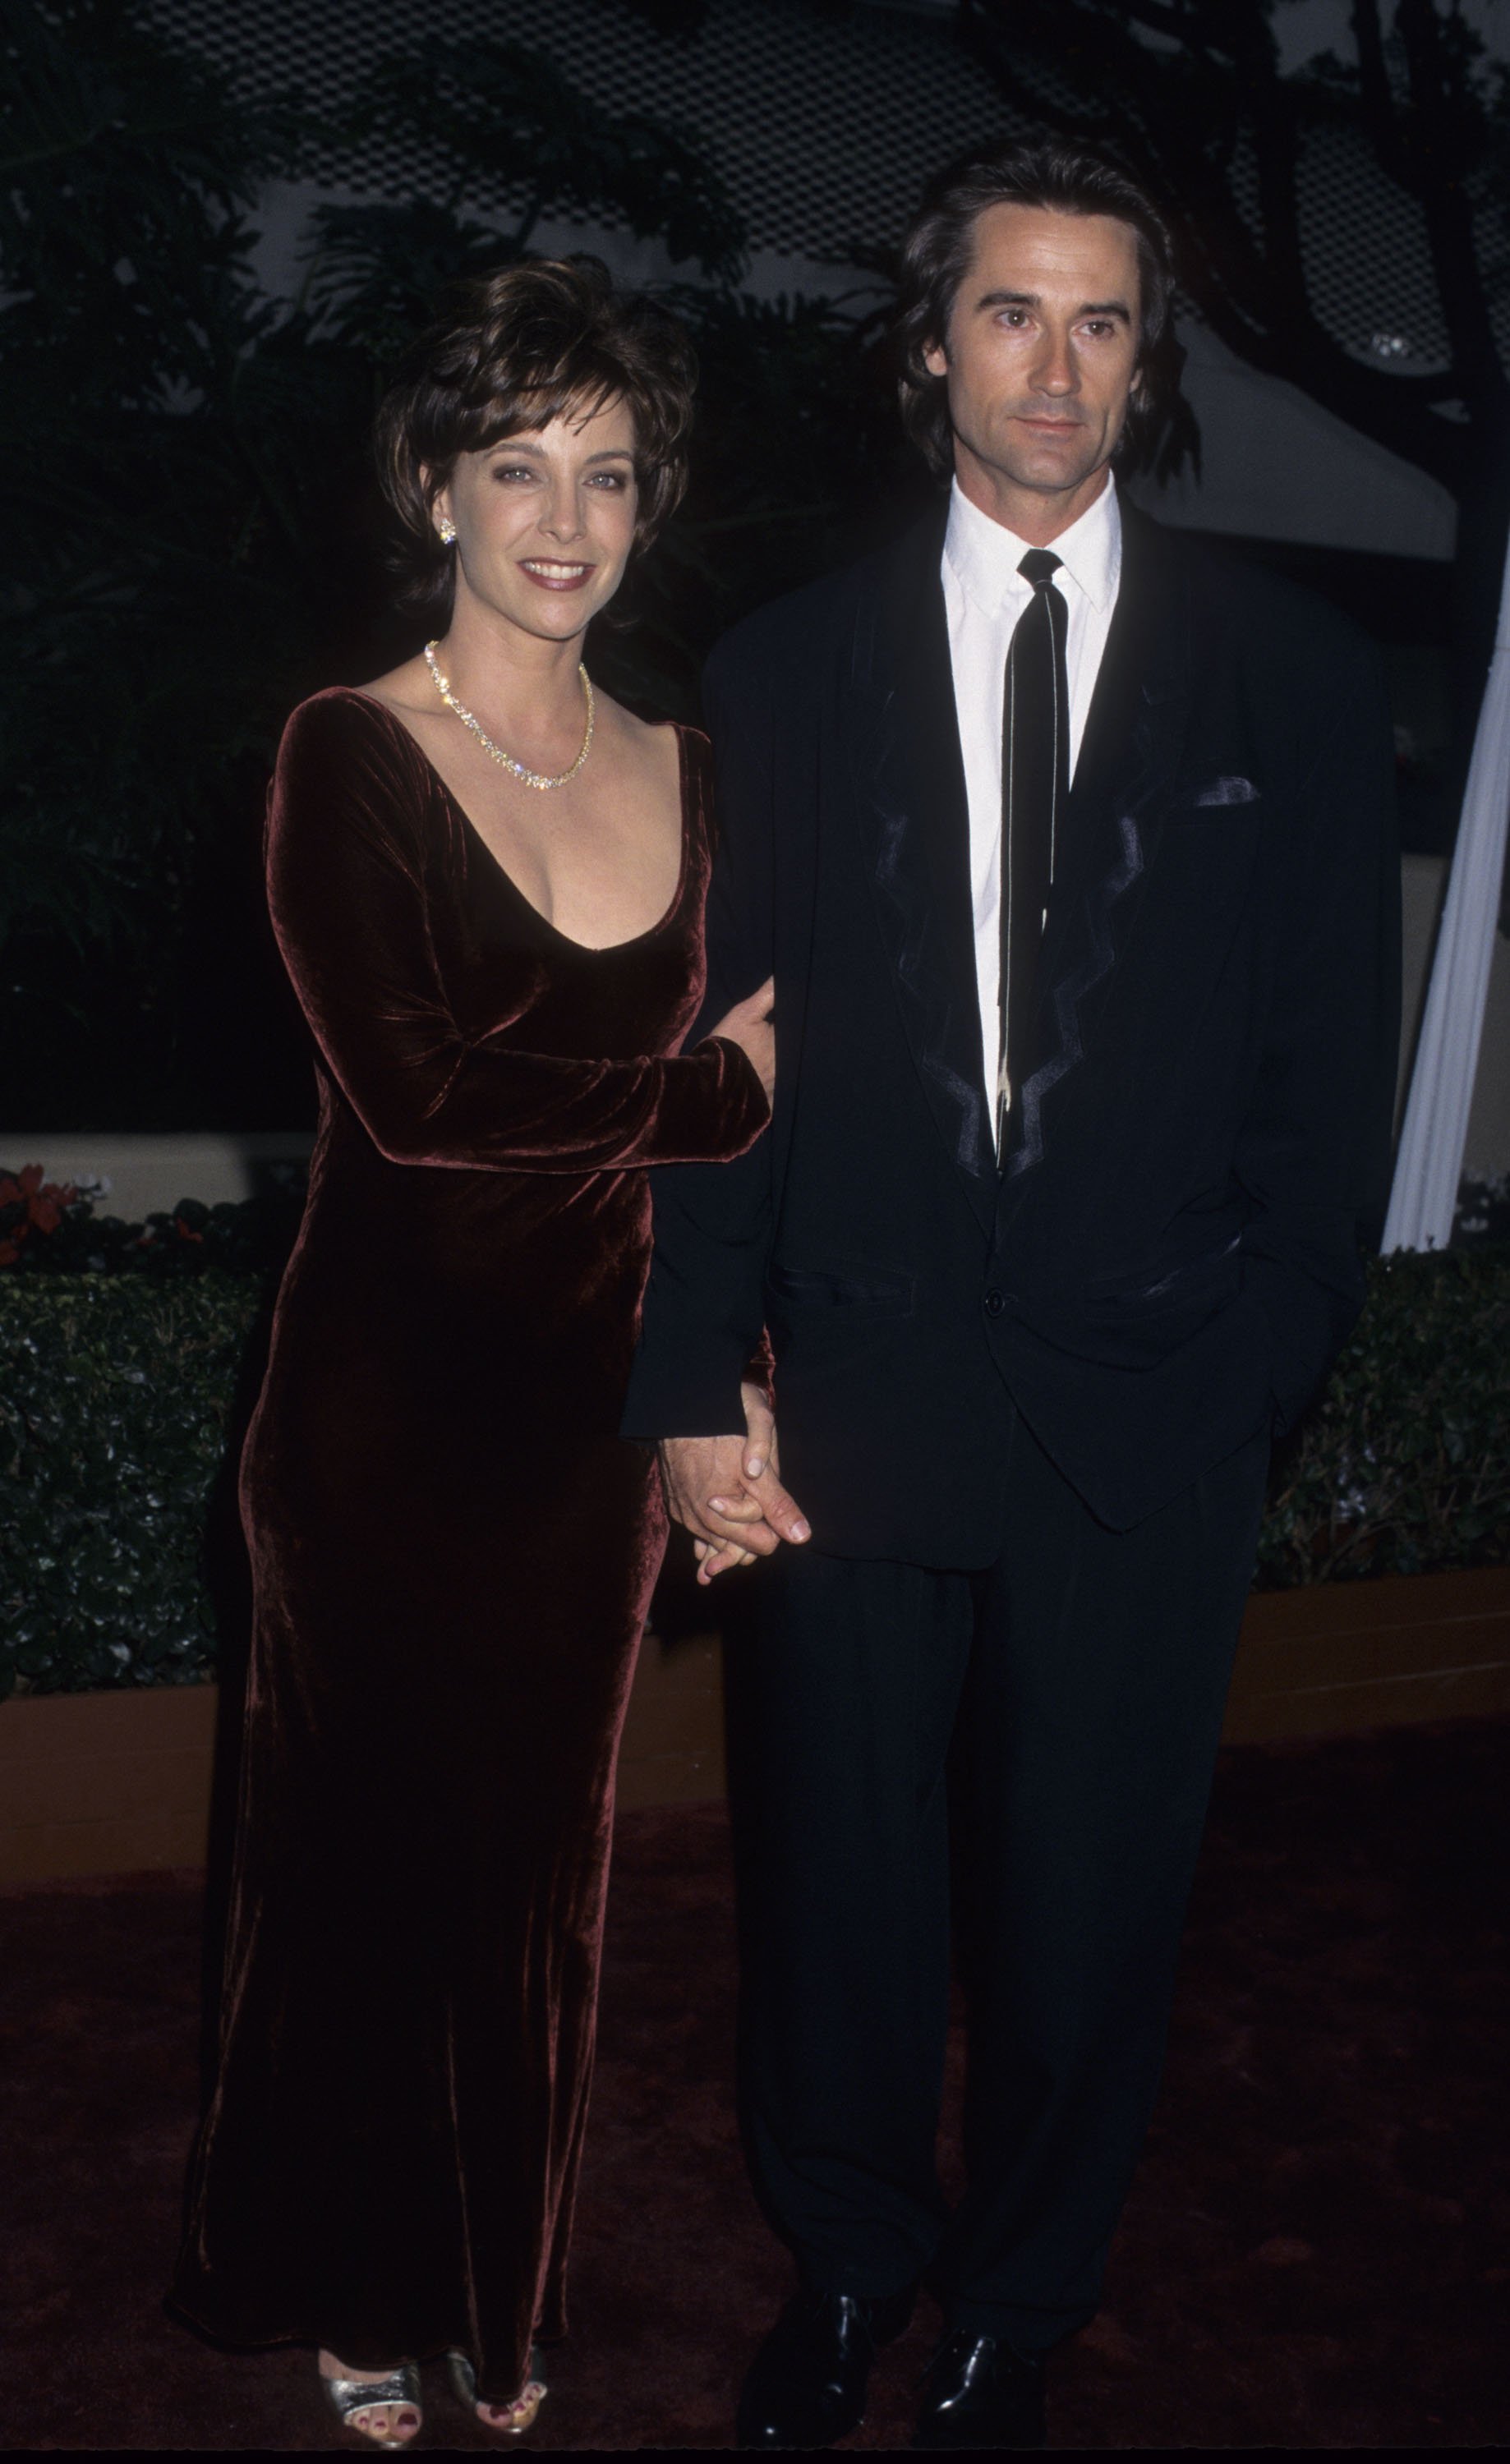 Actress Kathleen Quinlan and actor Bruce Abbott attend 53rd Annual Golden Globe Awards on January 21, 1996 at the Beverly Hilton Hotel in Beverly Hills, California. | Source: Getty Images